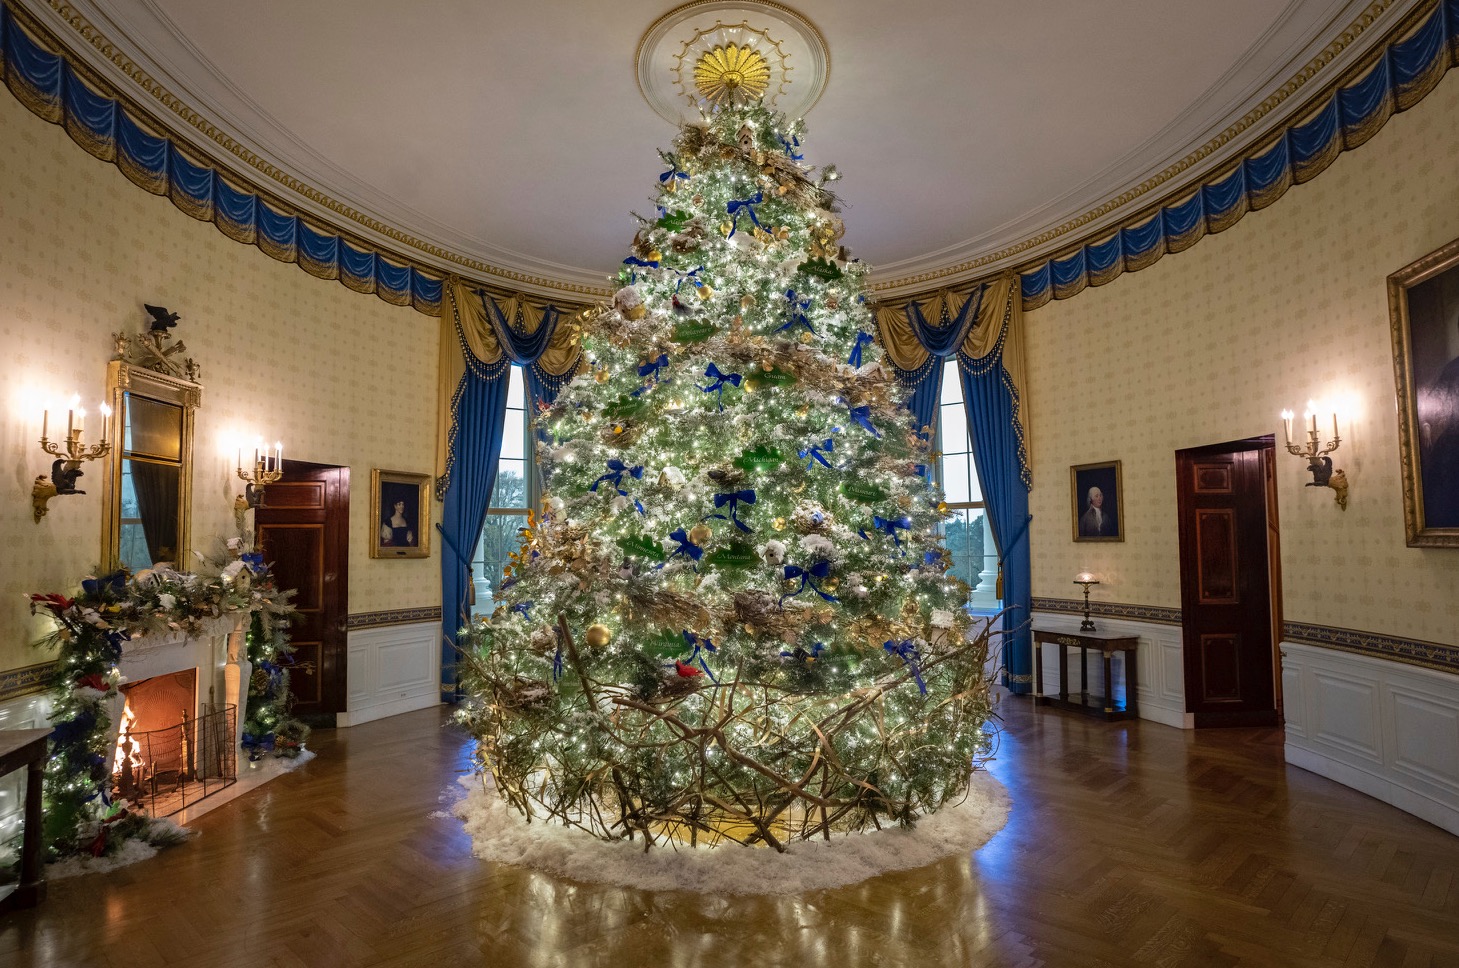 2022 Holidays at the White House